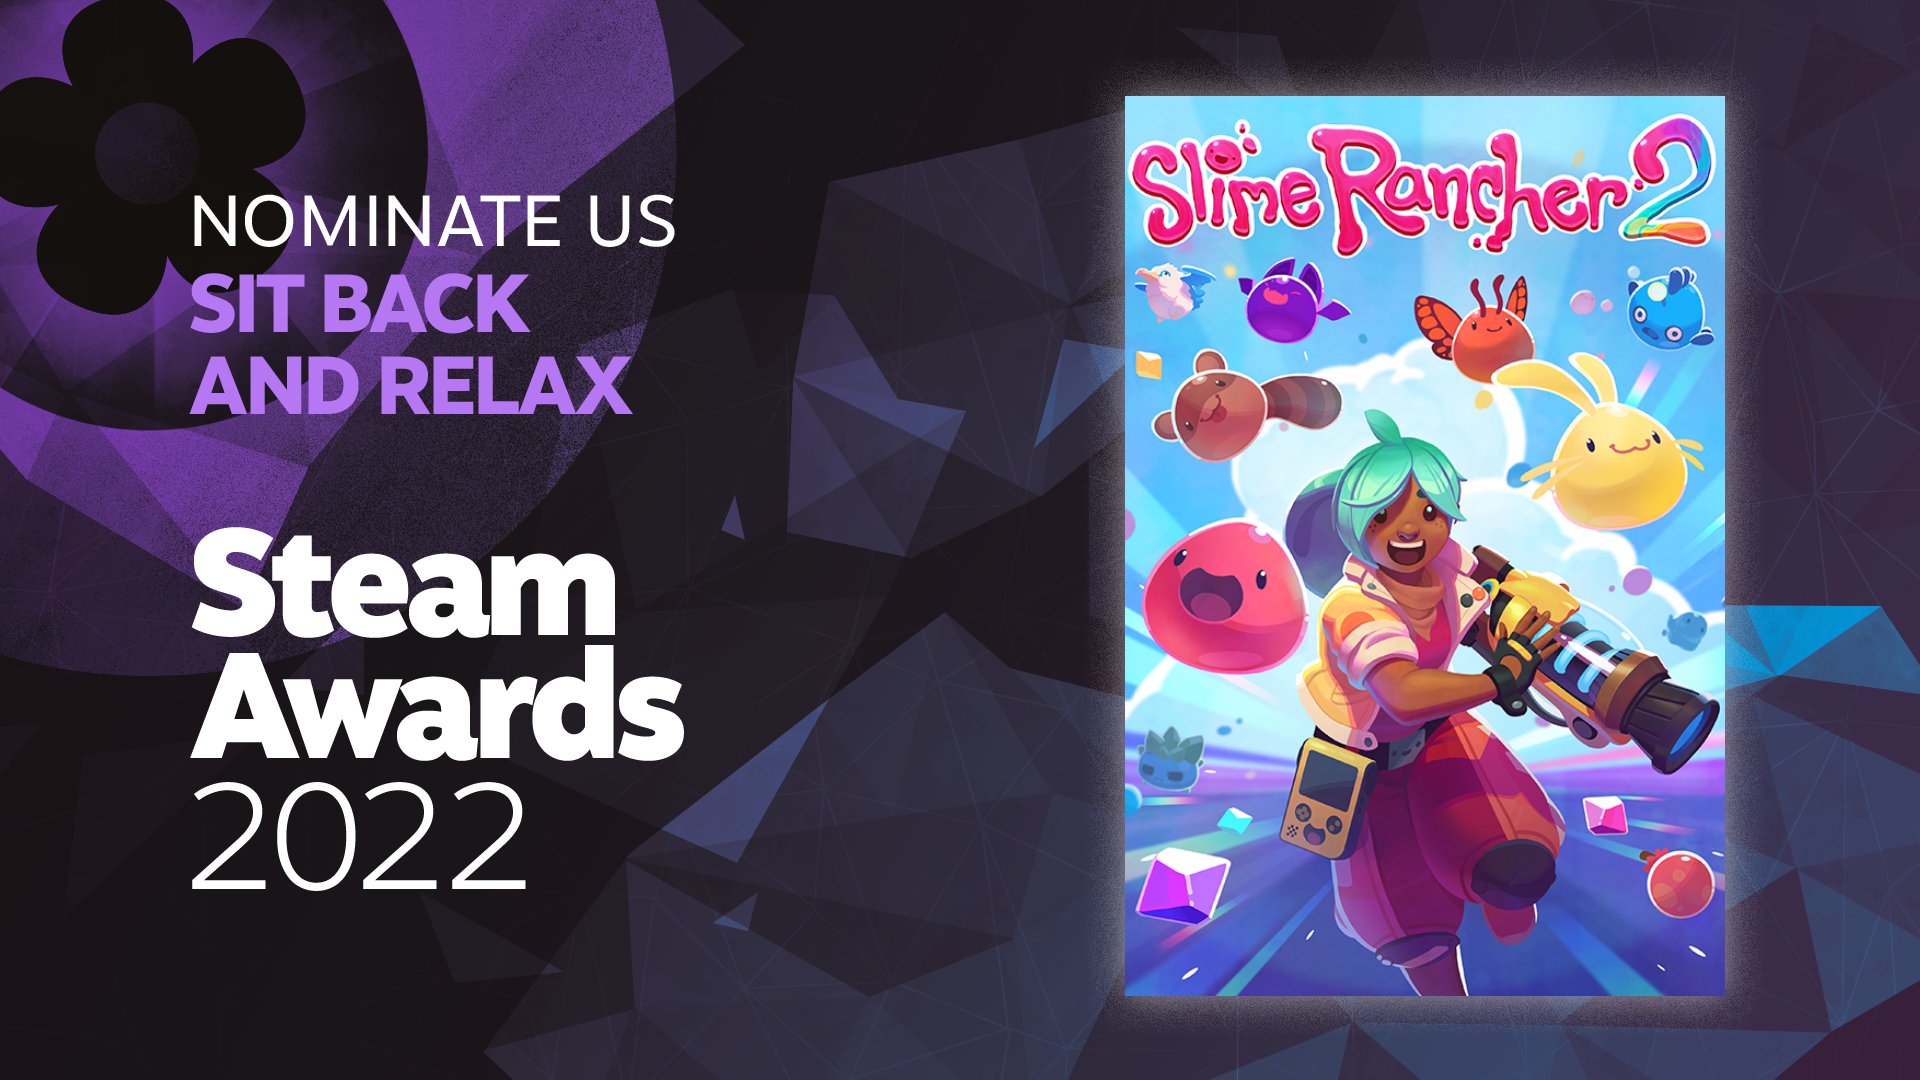 Slime Rancher on X: If you enjoy kicking back in the breezy, prismatic  fields of Rainbow Island as much as we do, consider nominating us for the  “Sit Back and Relax” Steam